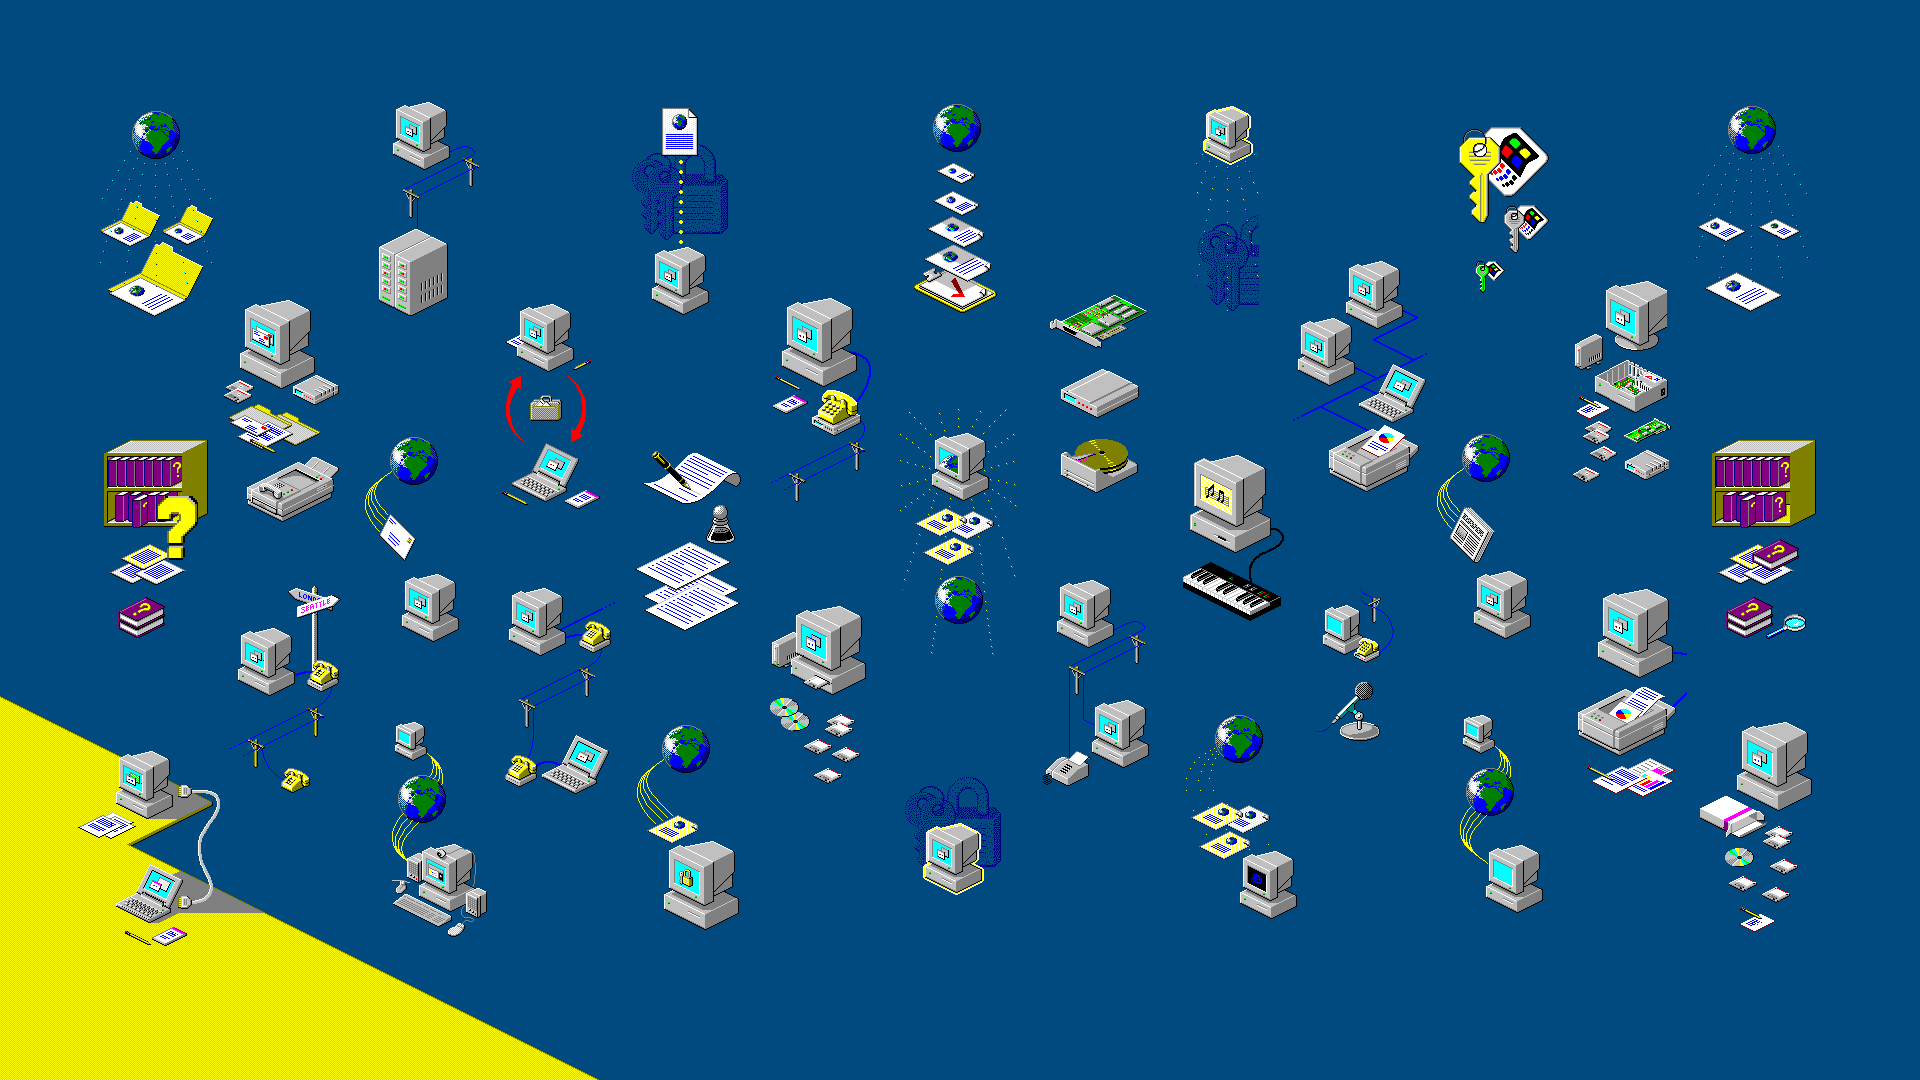 A blue and yellow poster with many different items - Windows 11, Windows 98, Windows 95